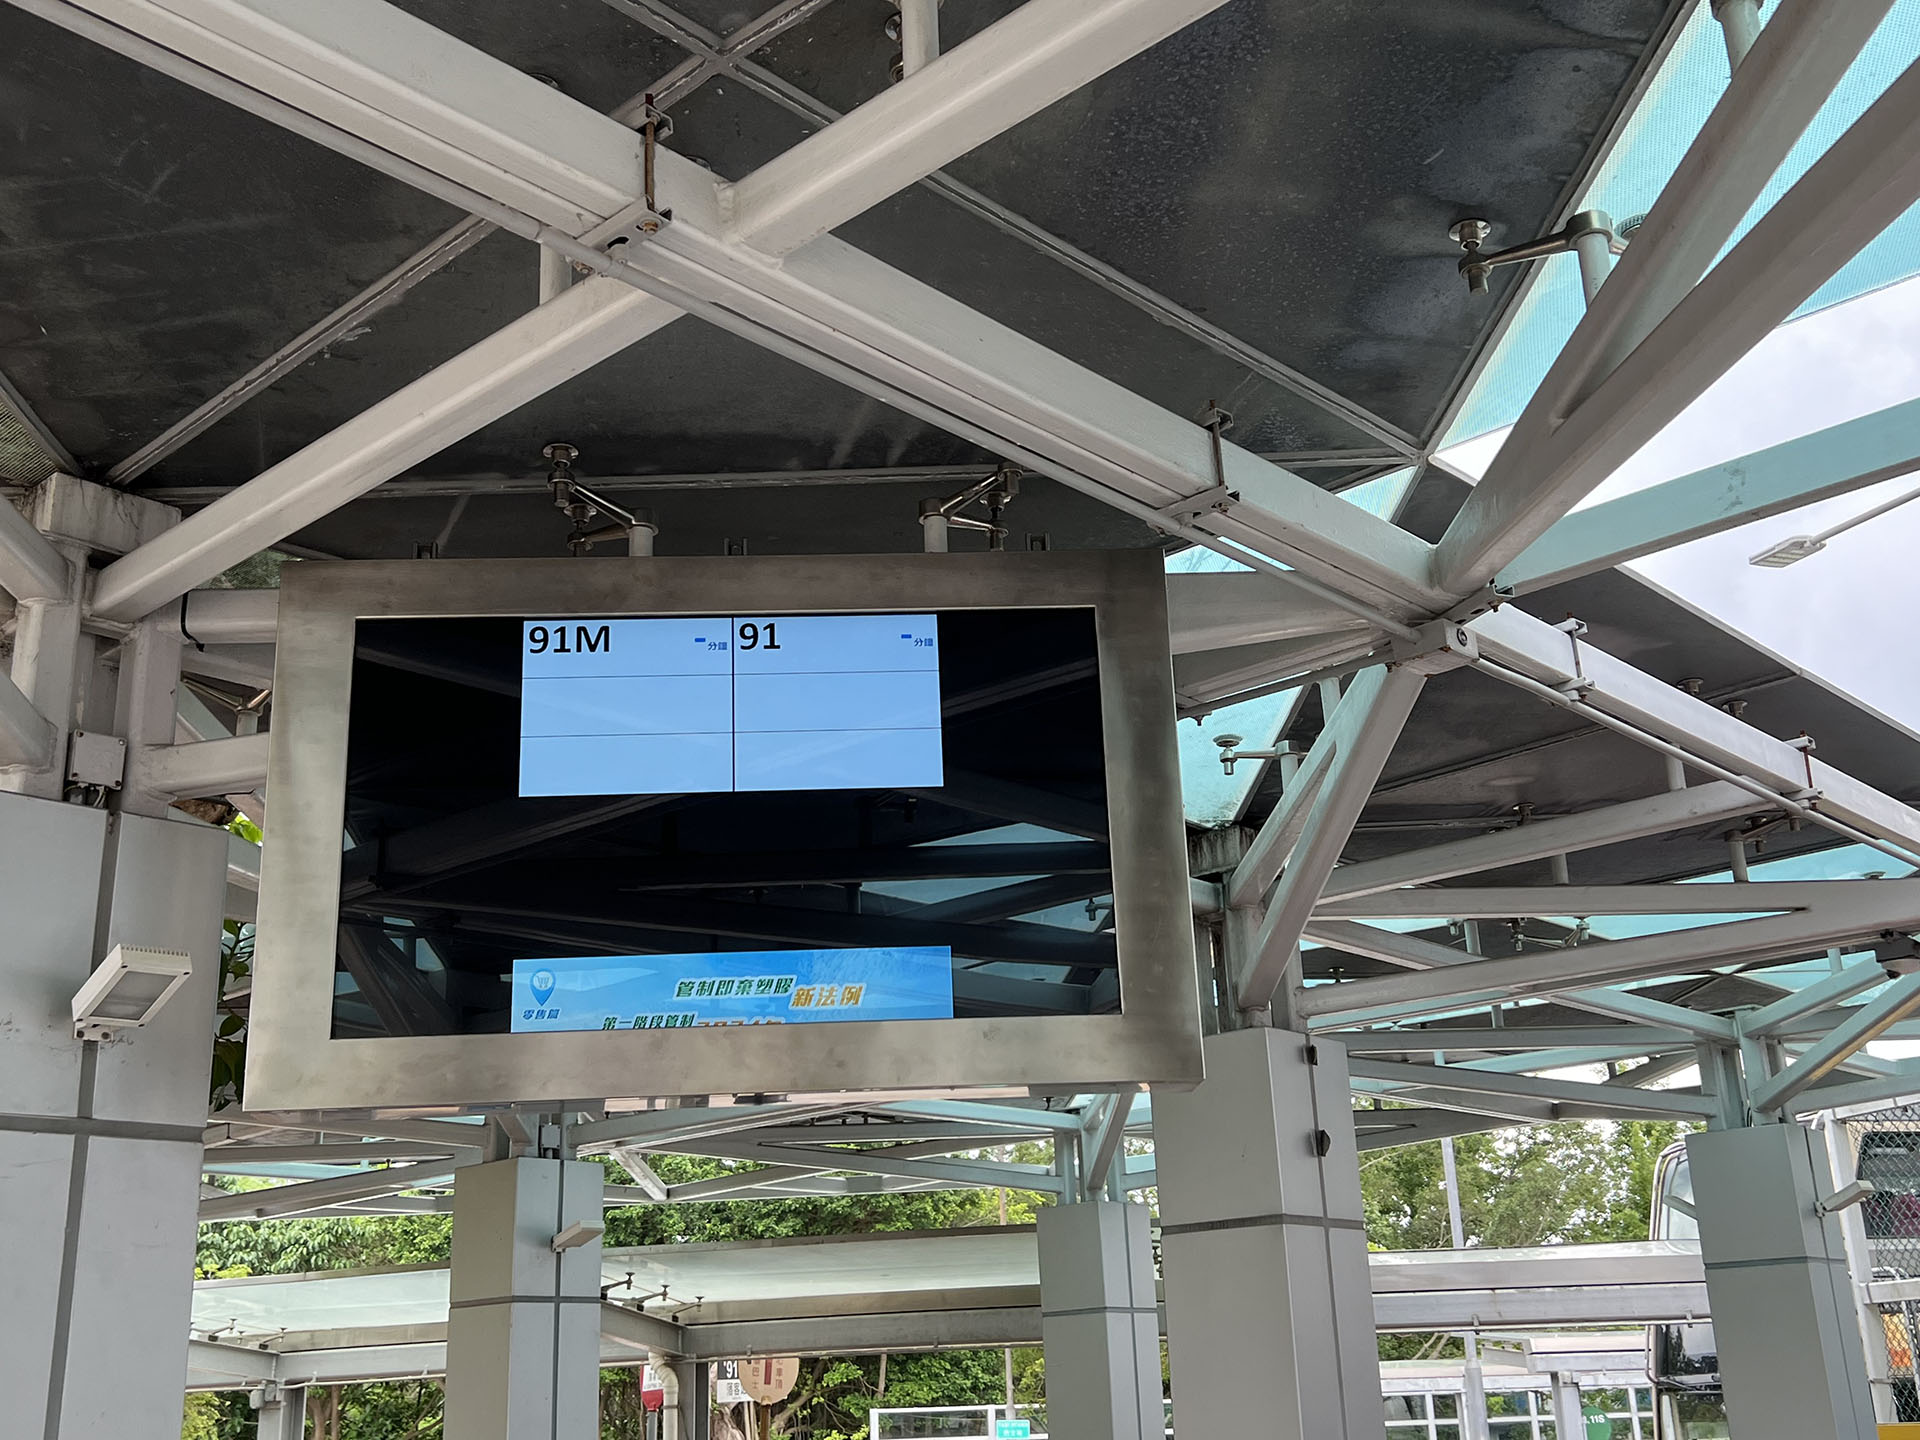 New Screen Display at HKUST South Bus Stations